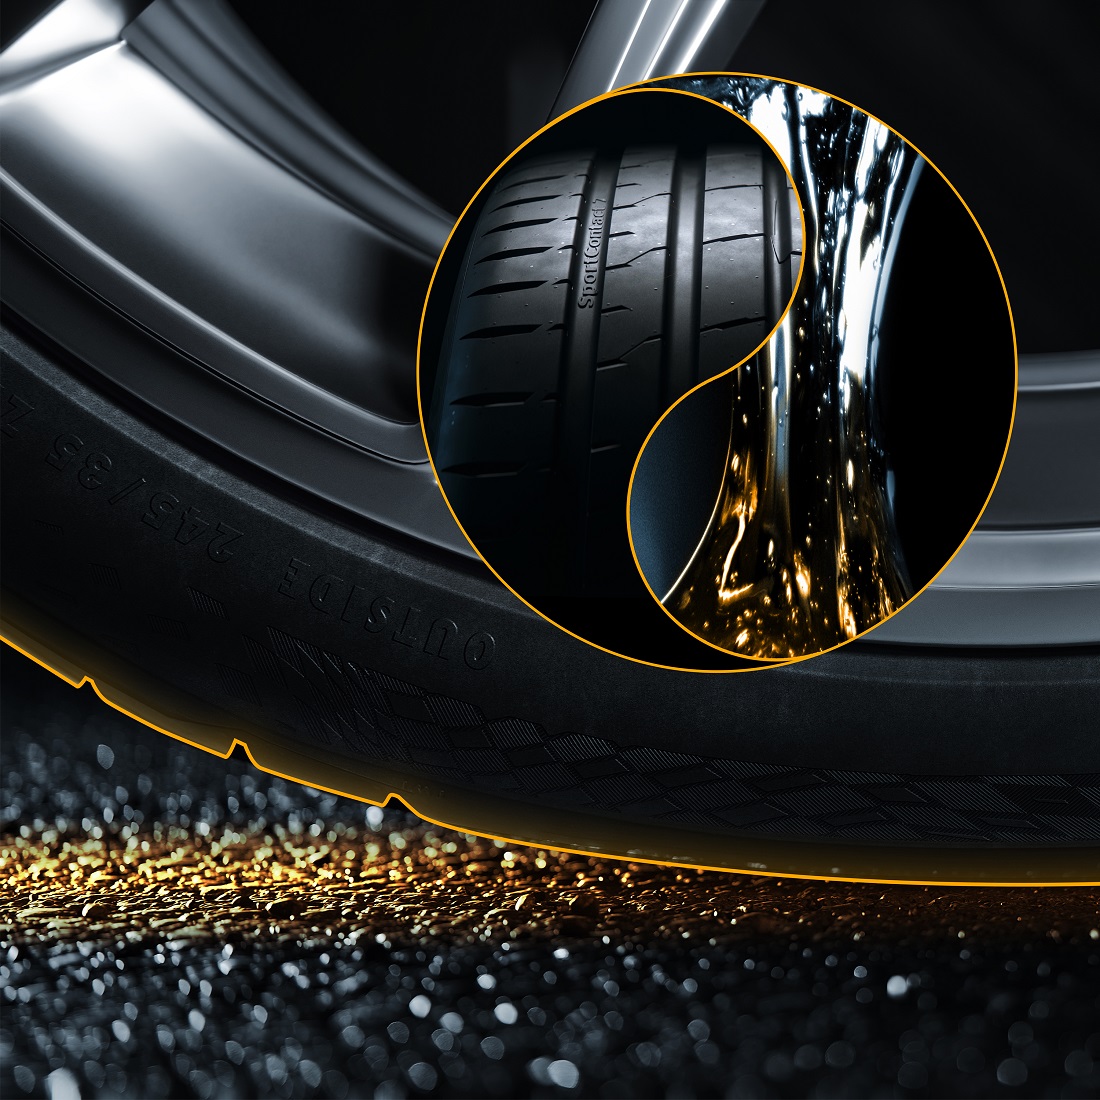 continental, continental tyre malaysia, malaysia, continental tyre malaysia launches sportcontact 7 uuhp flagship tyre